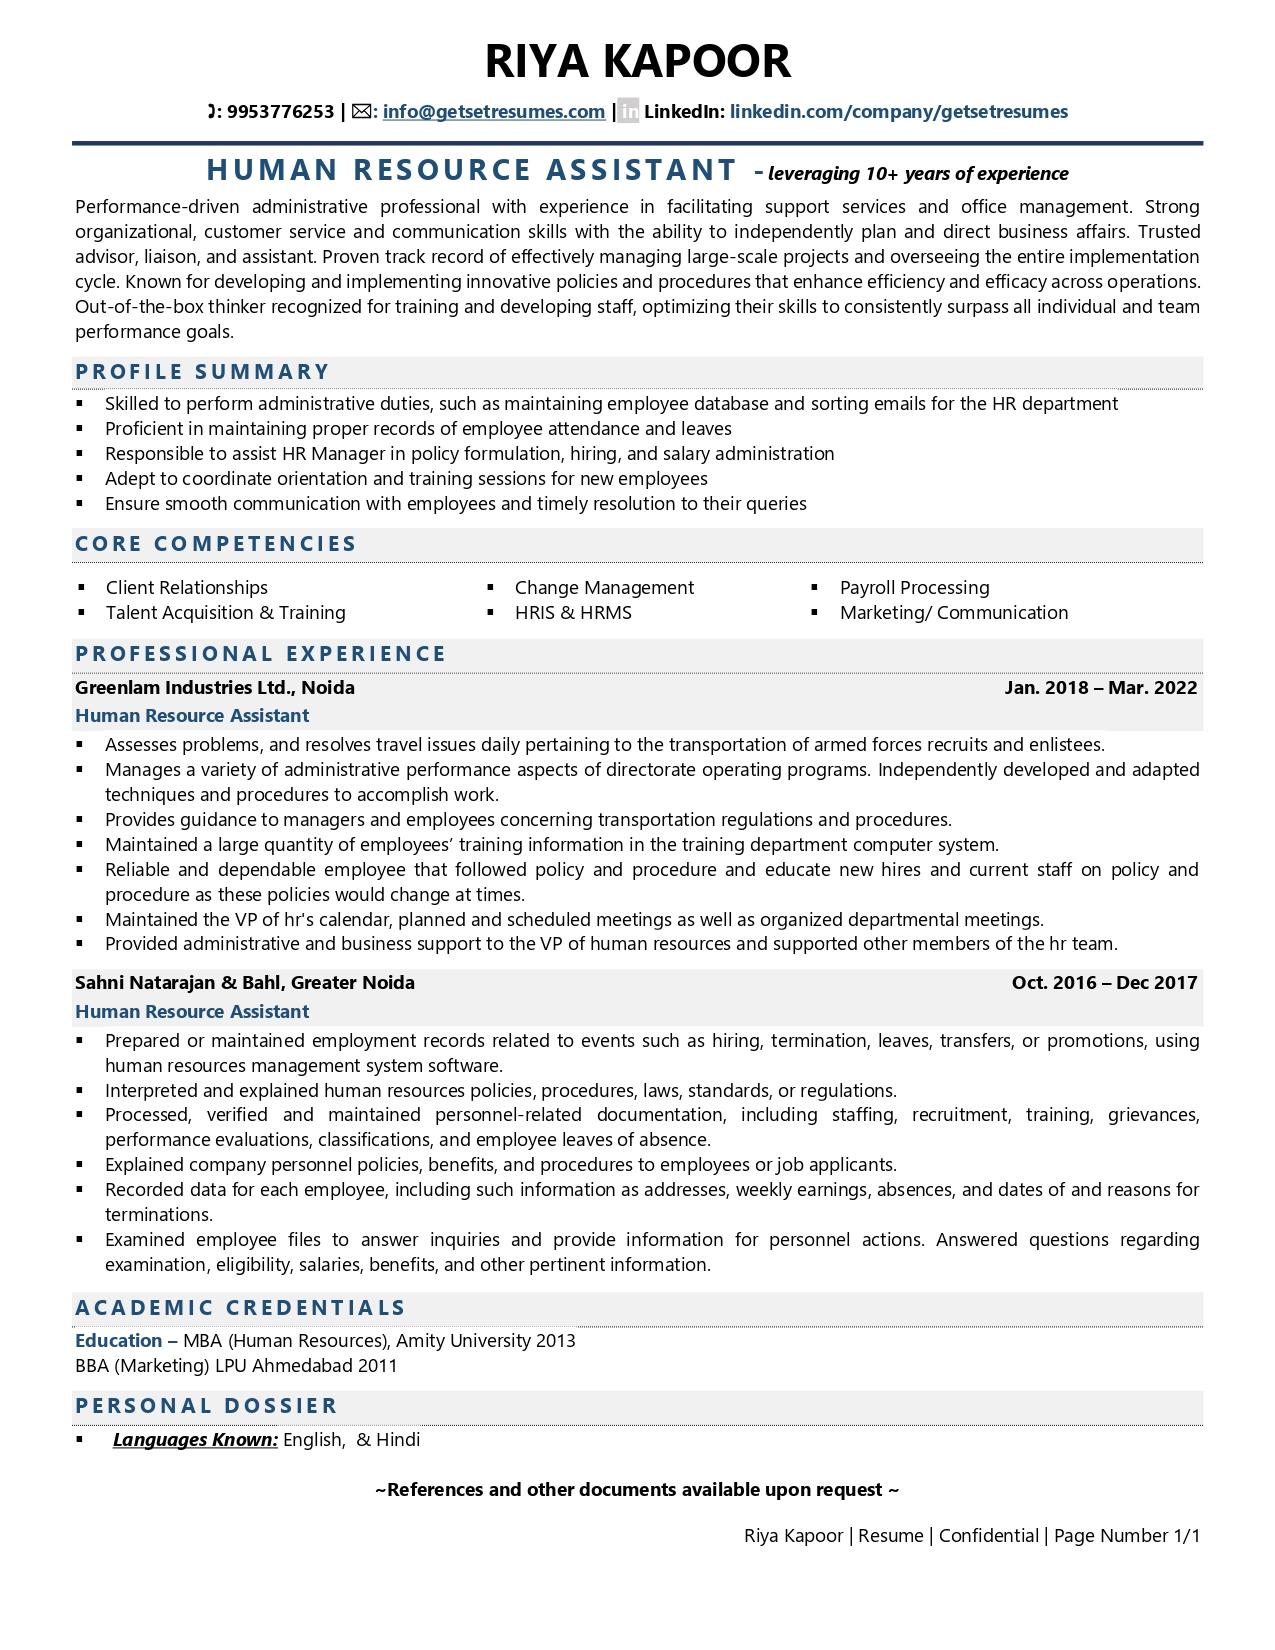 Human Resource Assistant - Resume Example & Template